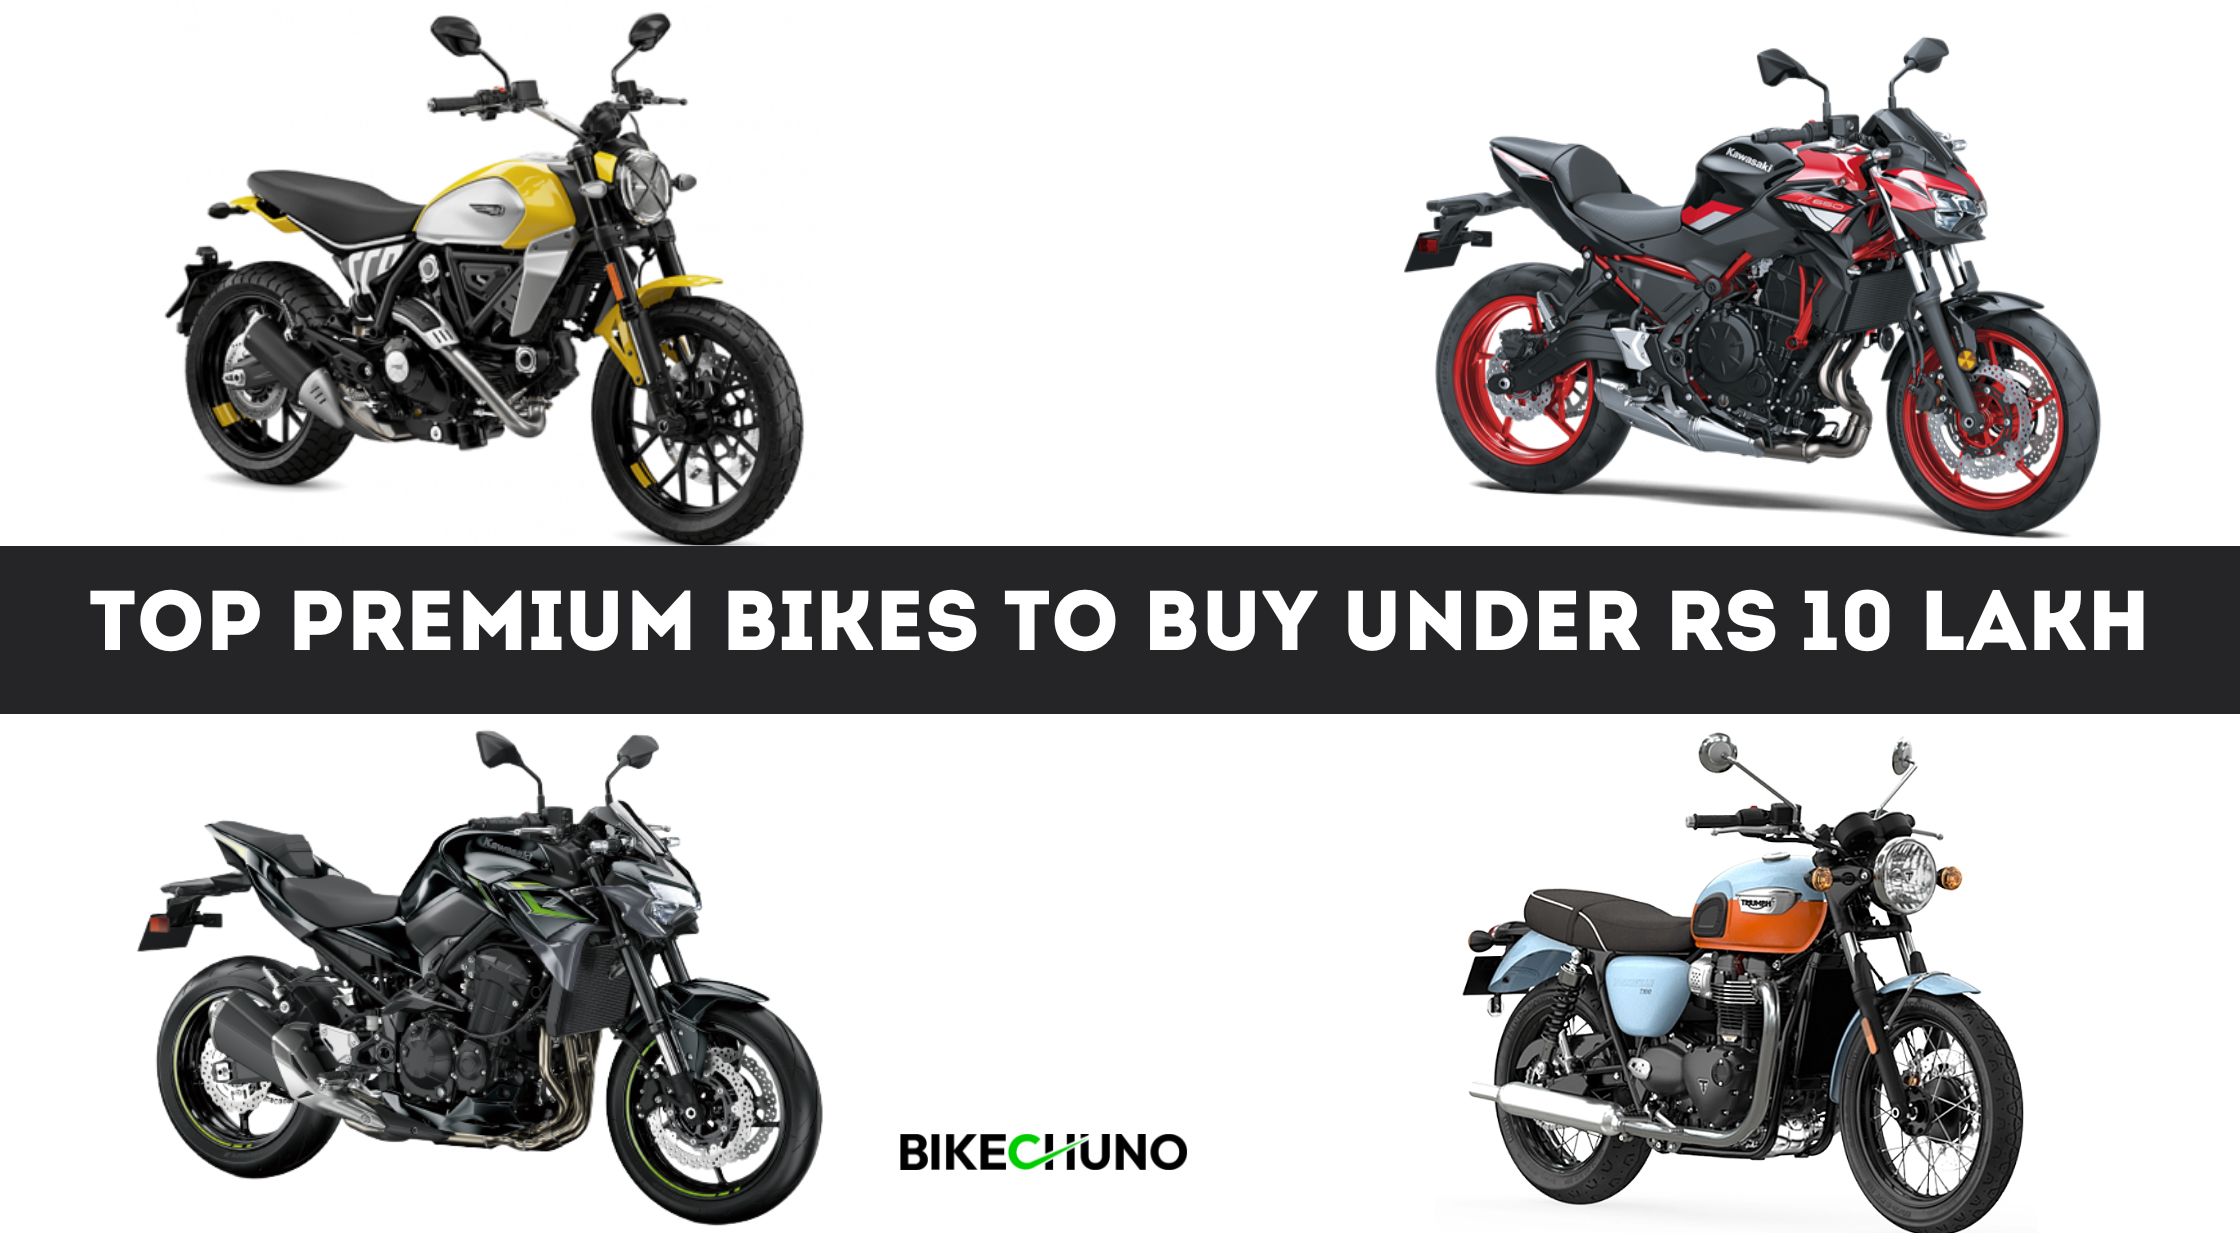 Top Premium Bikes To Buy Under Rs 10 Lakh